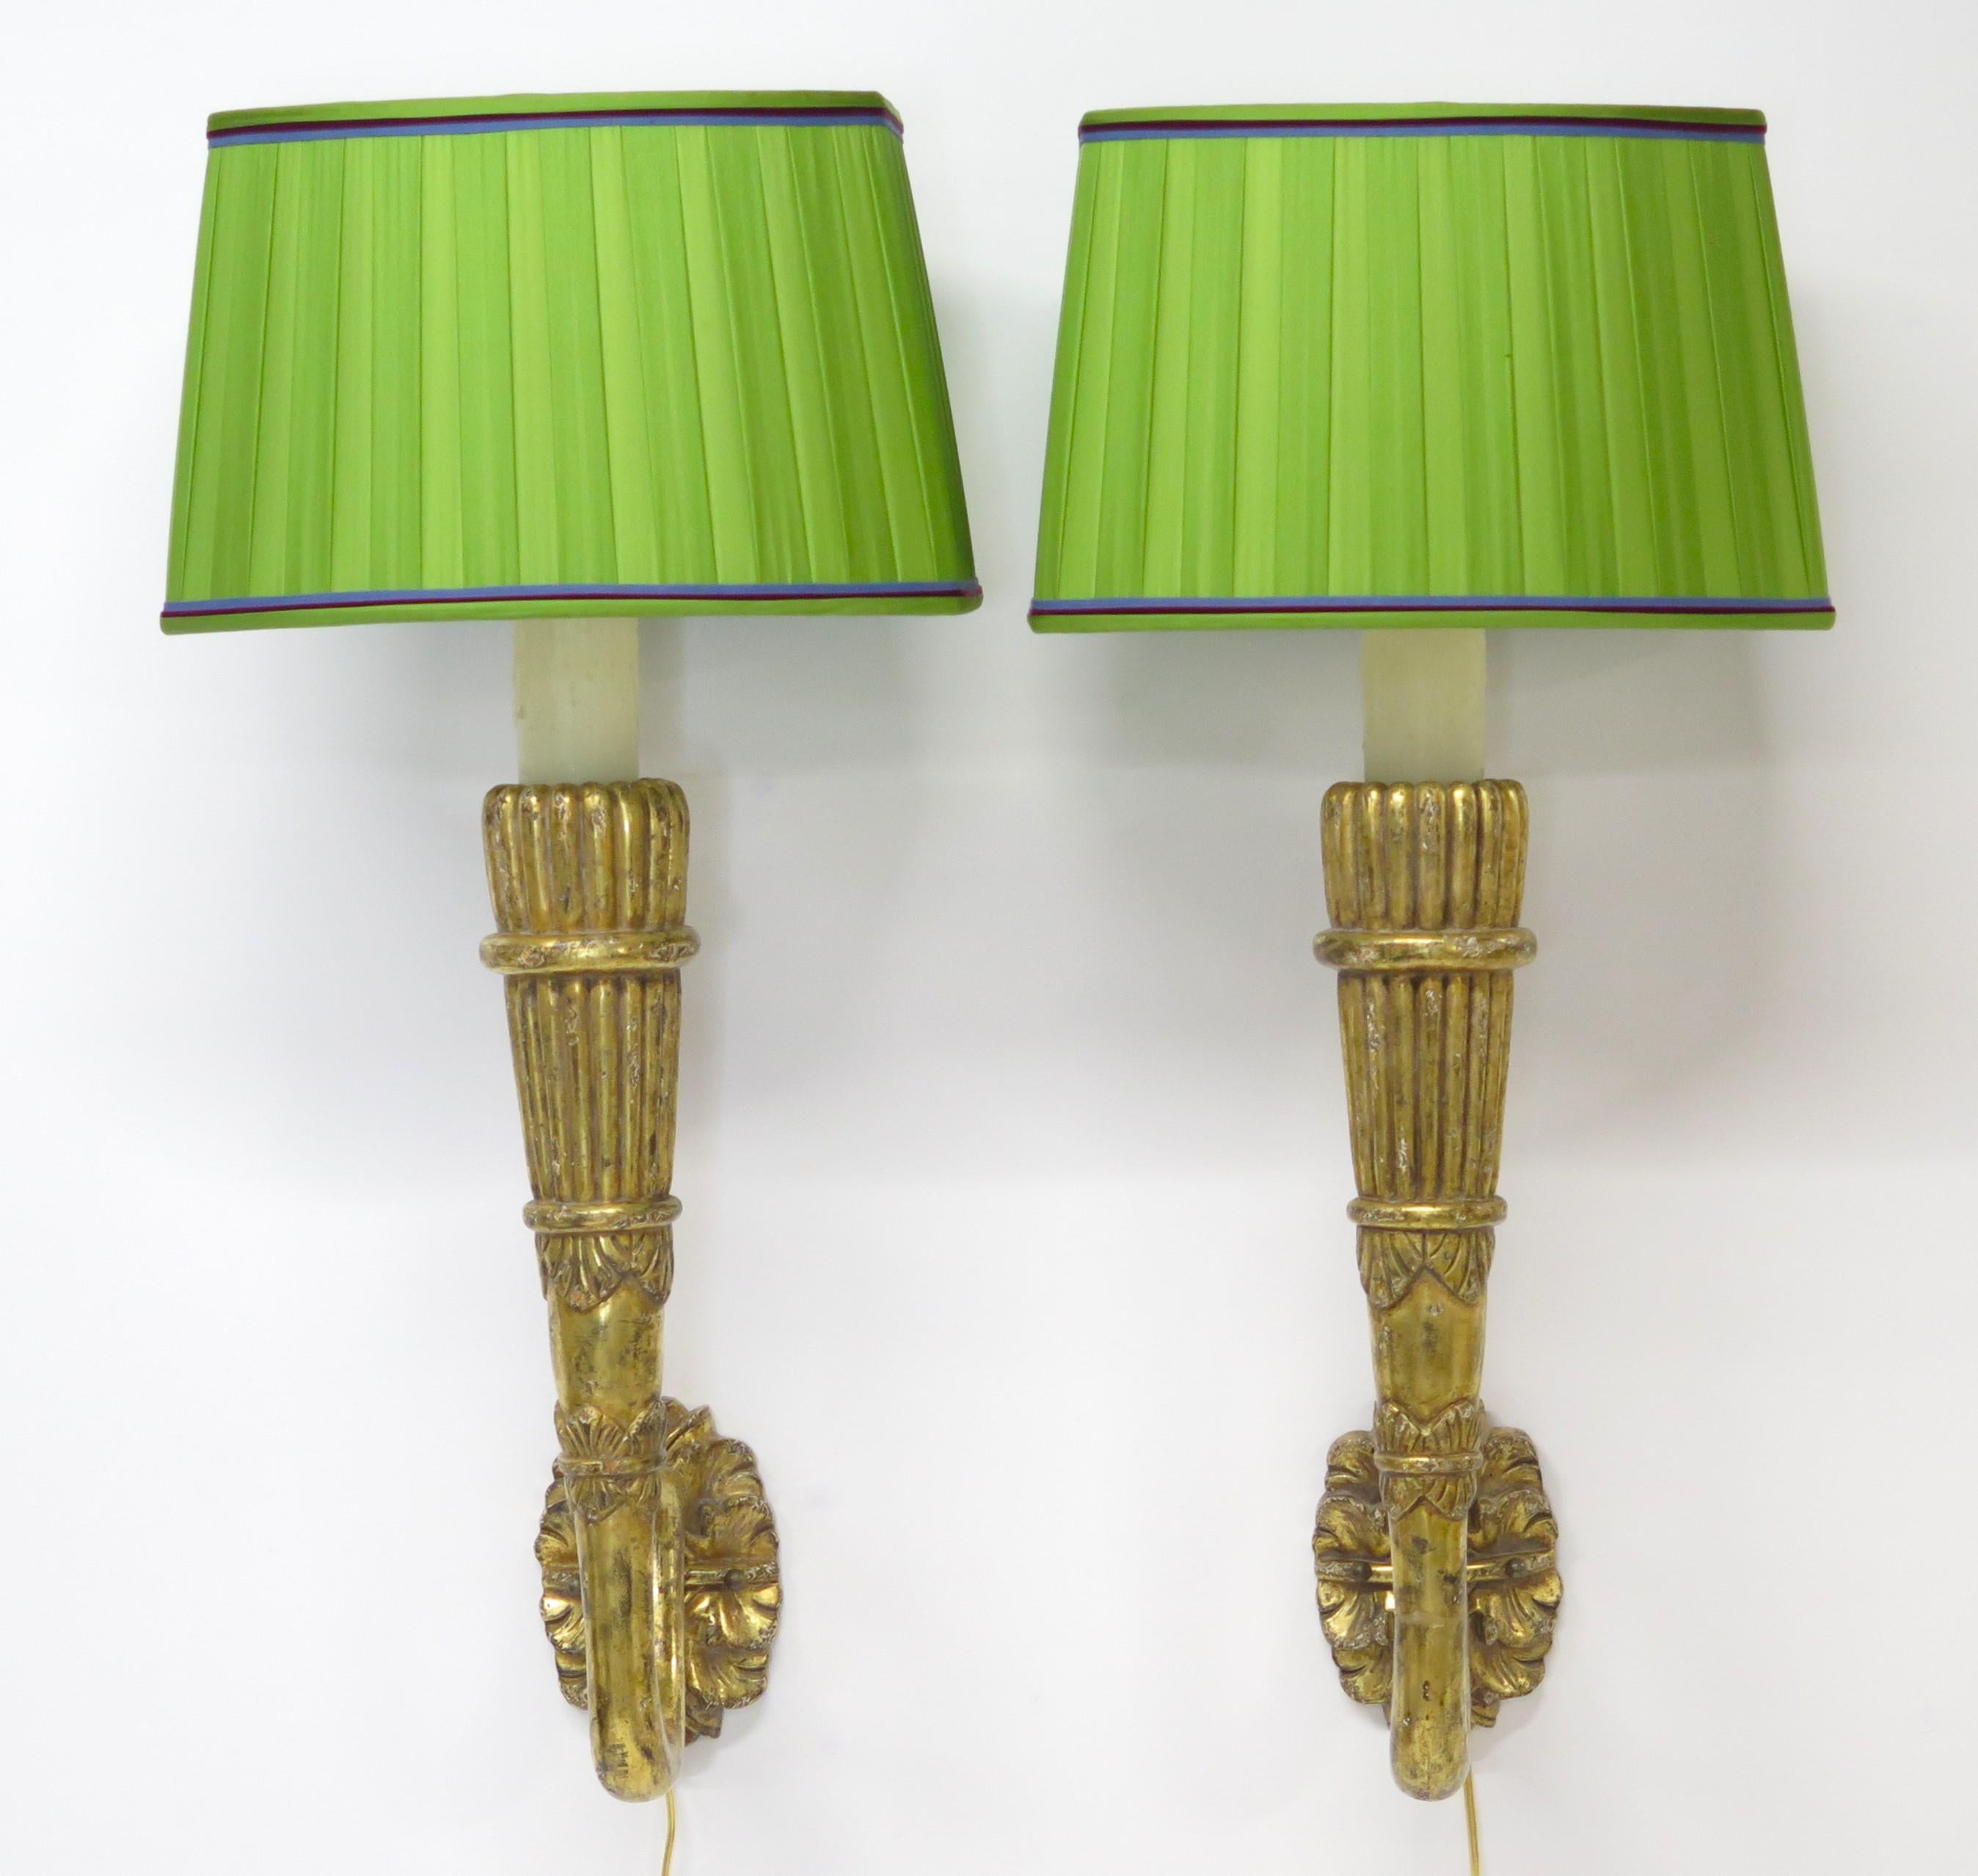 Pair of Art Deco Giltwood Sconces in the Form of Stylized Wall Torches For Sale 7